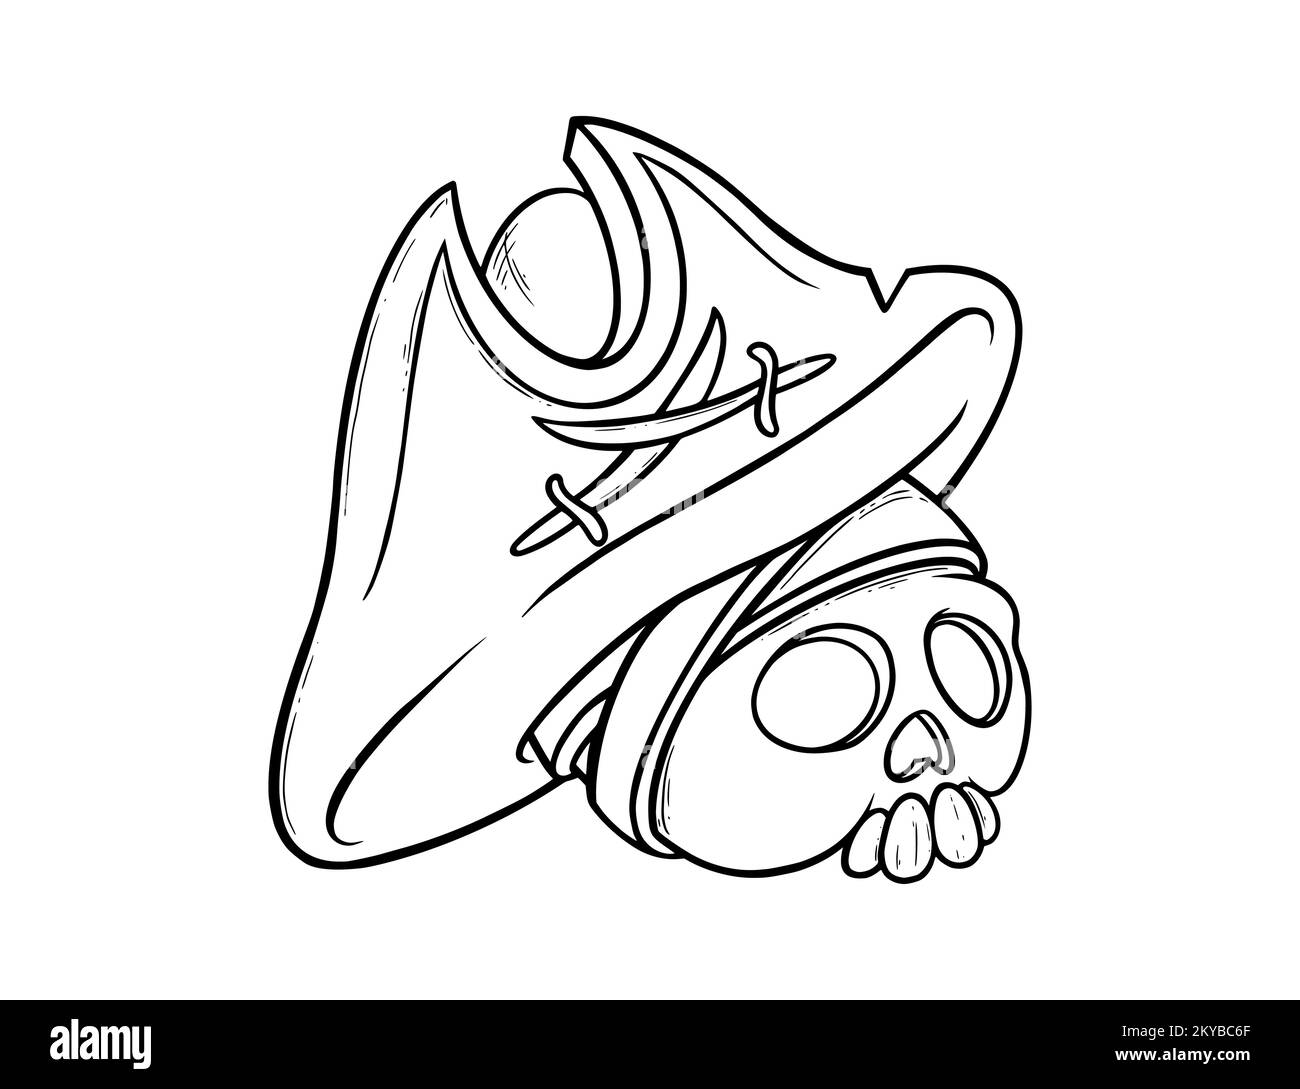 Pirate hat sketch on a skull. Corsair skull in tricorn hat with pirate symbol of crossed swords. Vector illustration isolated in white background Stock Vector